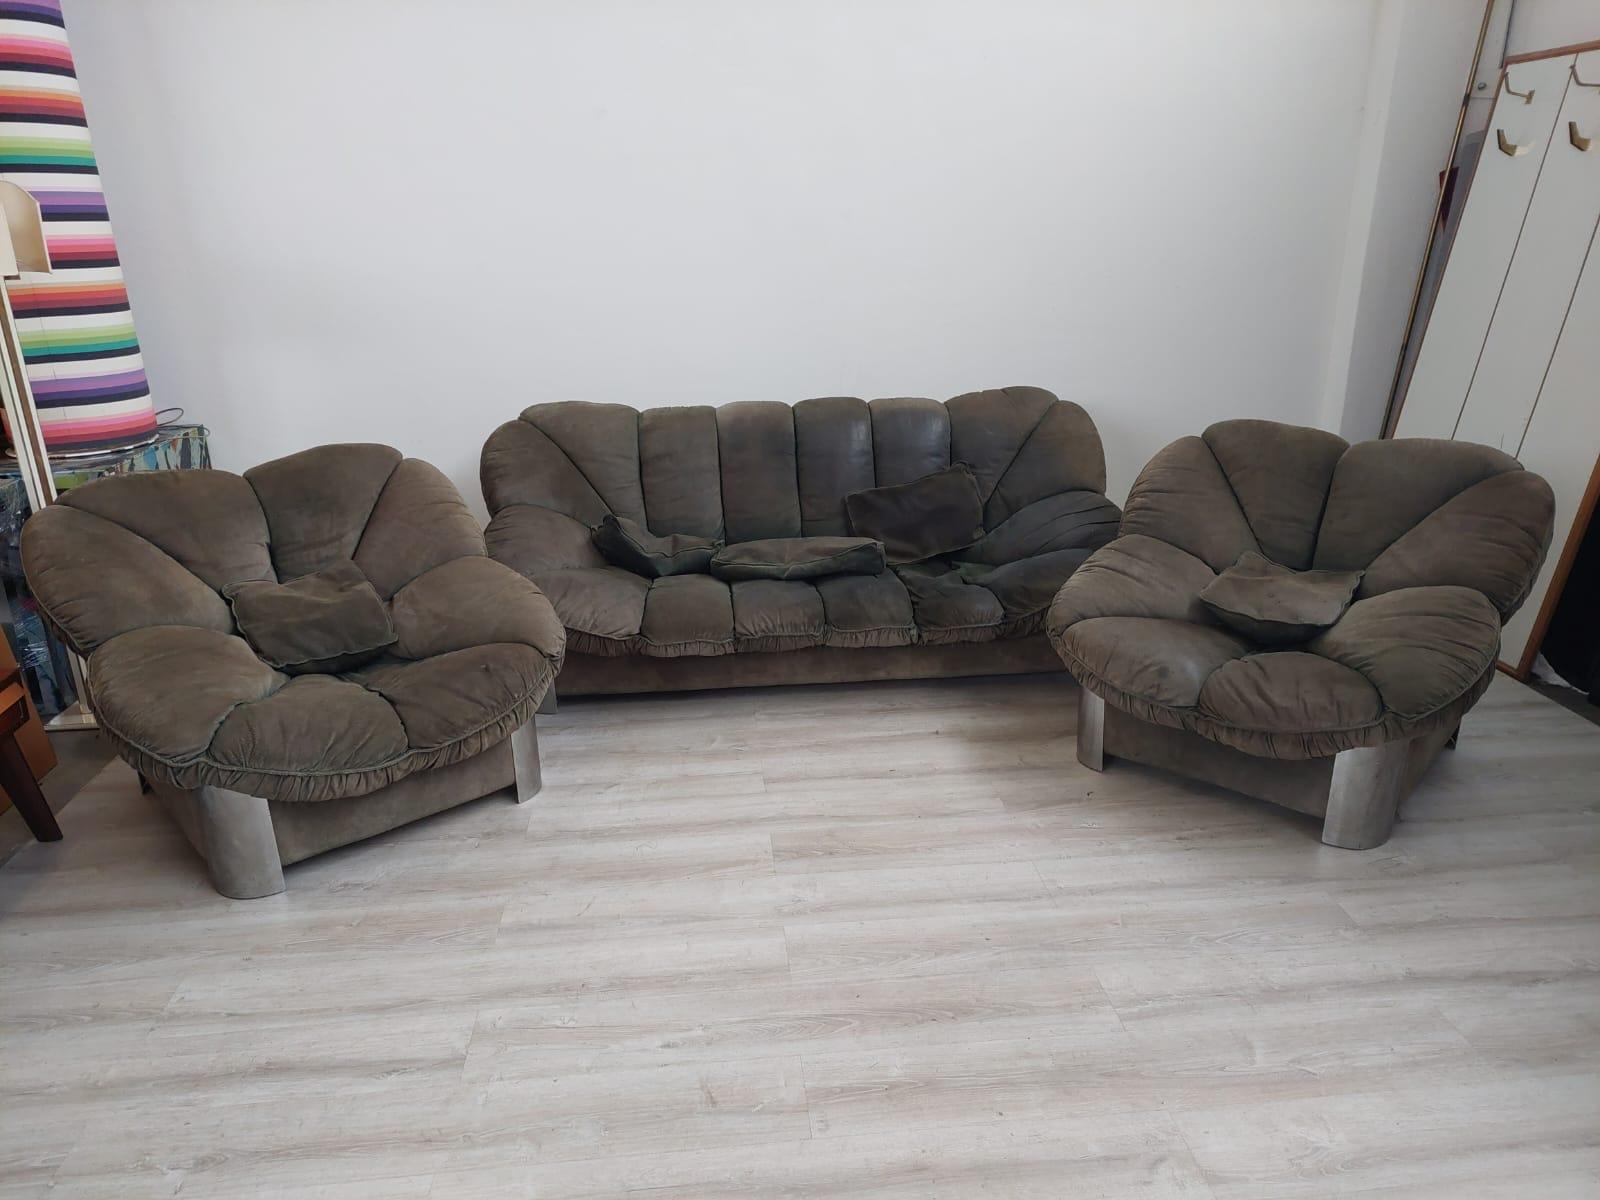 Italian Space Age Suede and stainless steel living Room Set consisting of one sofa and two armchairs.
The set is in good vintage conditions, shows wear from previous use, but remain in fair conditions.
The structure still turns out to be very solid